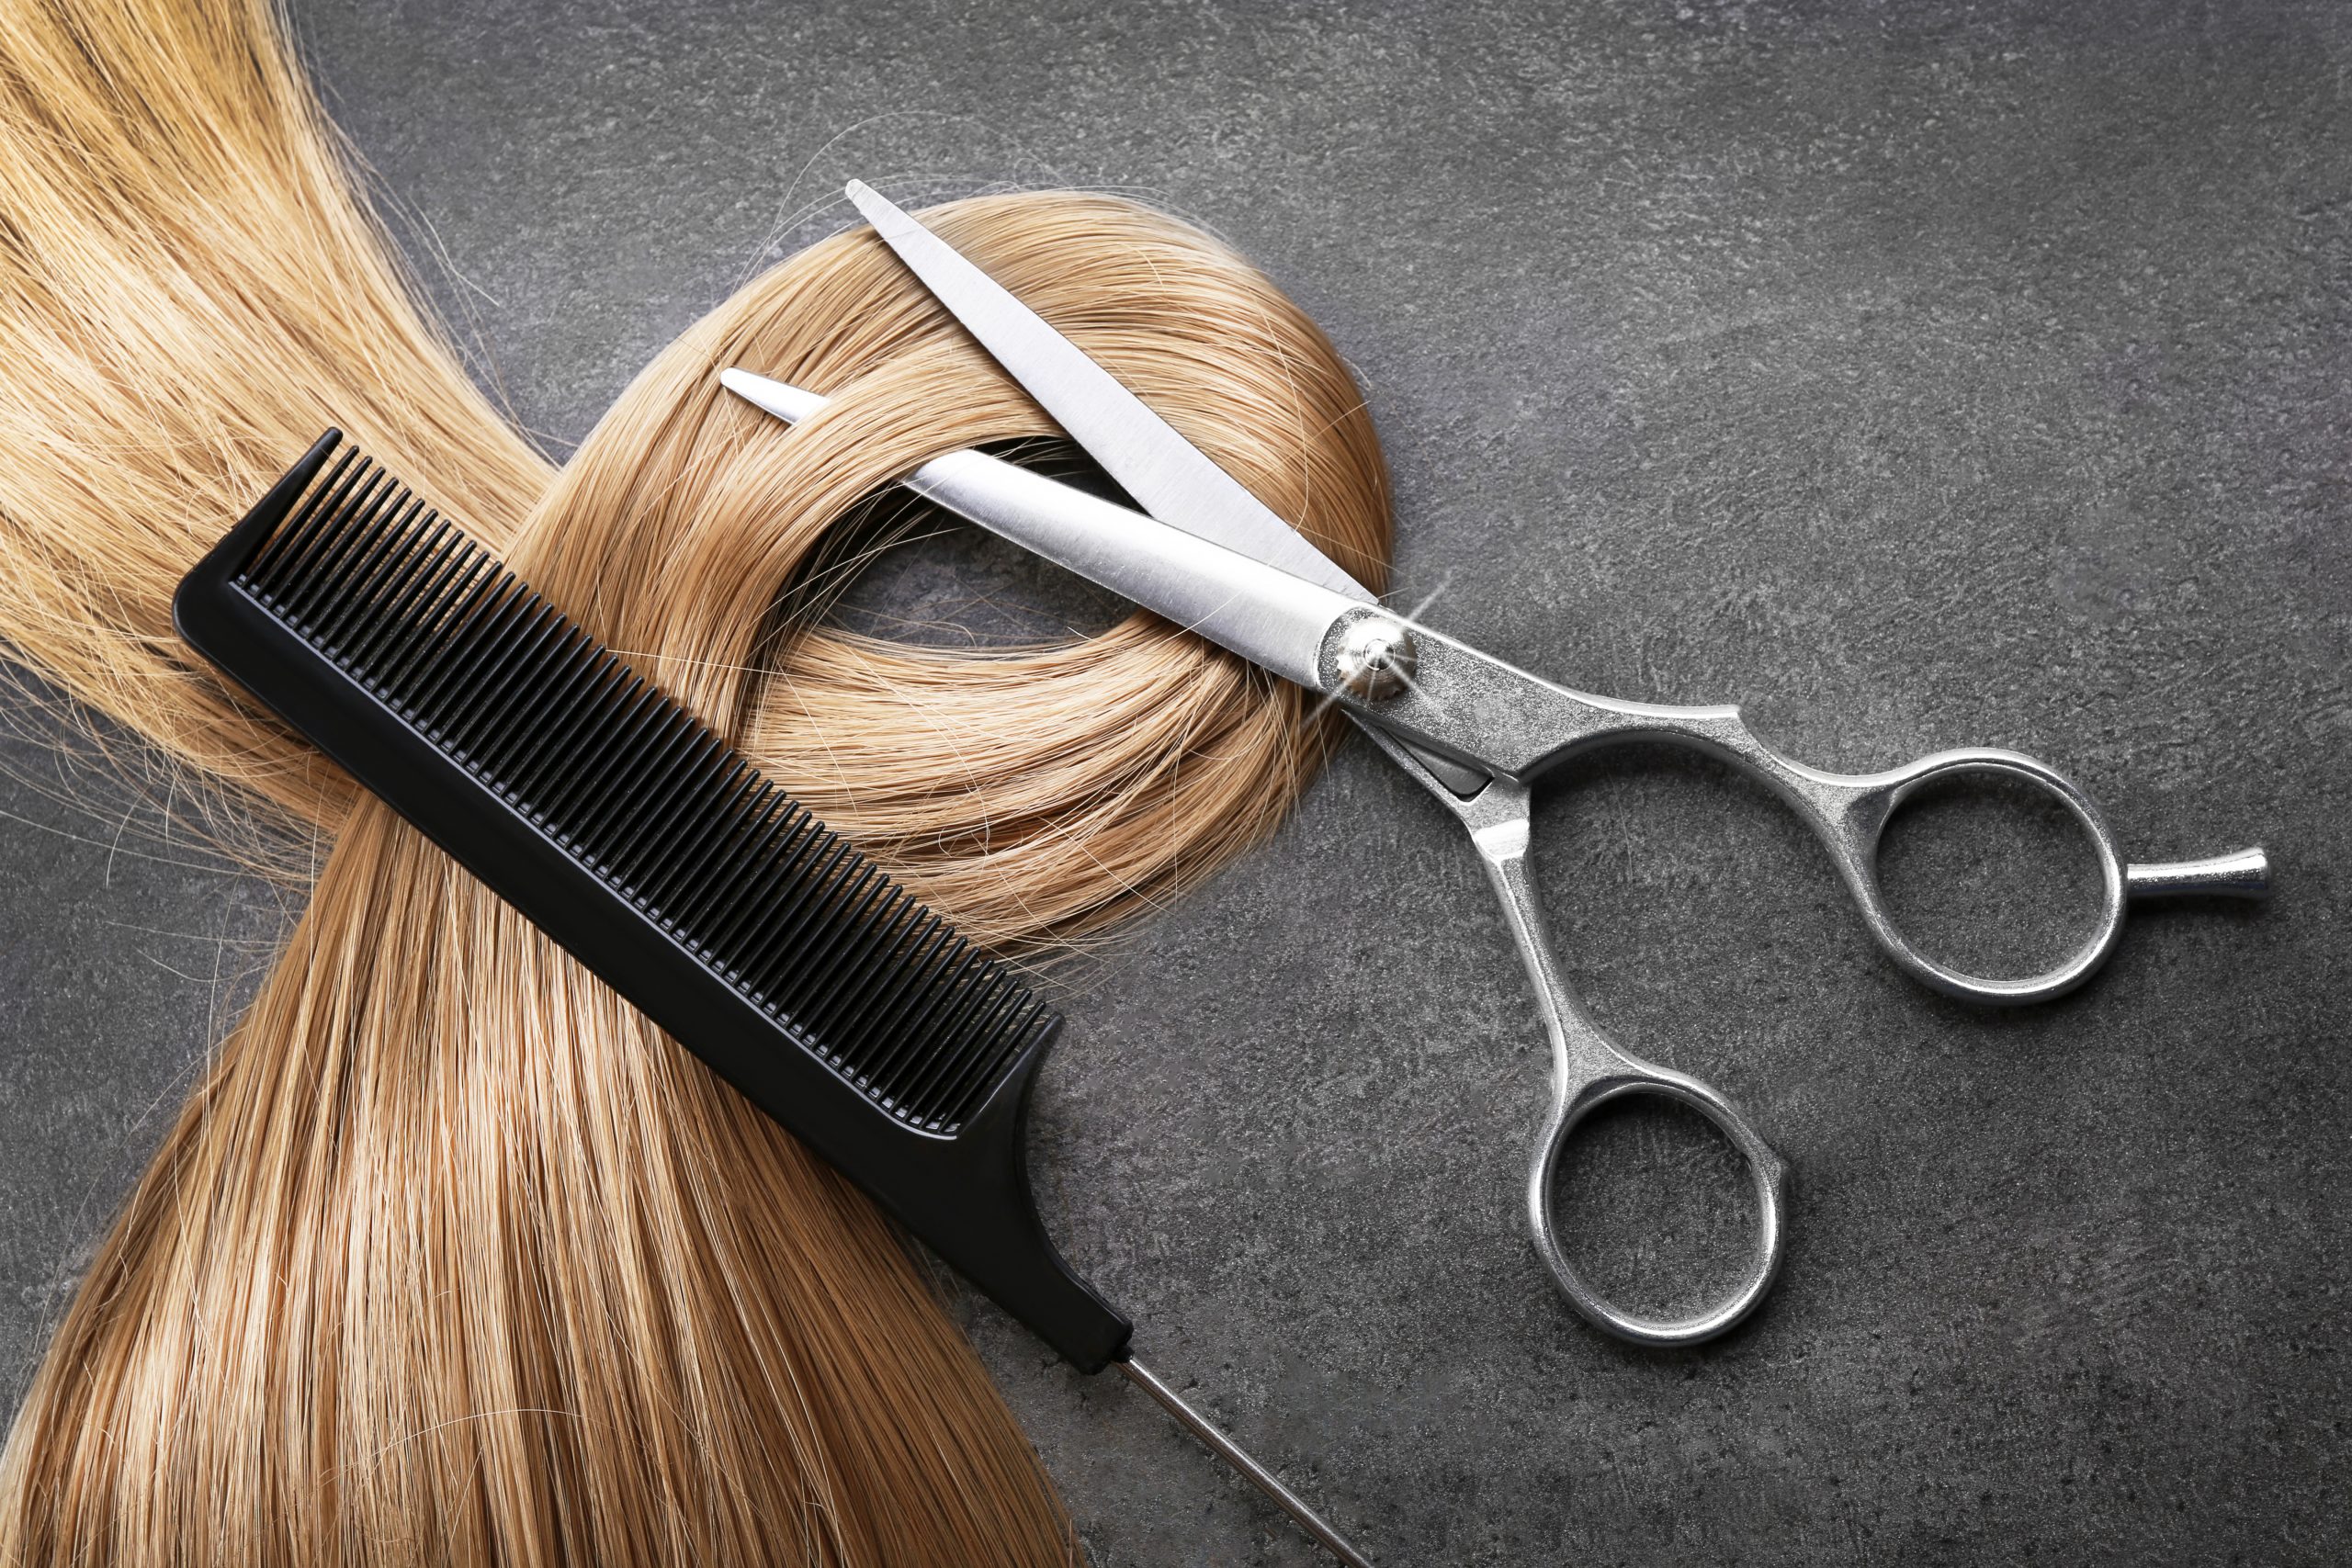 Scissors with hair and comb